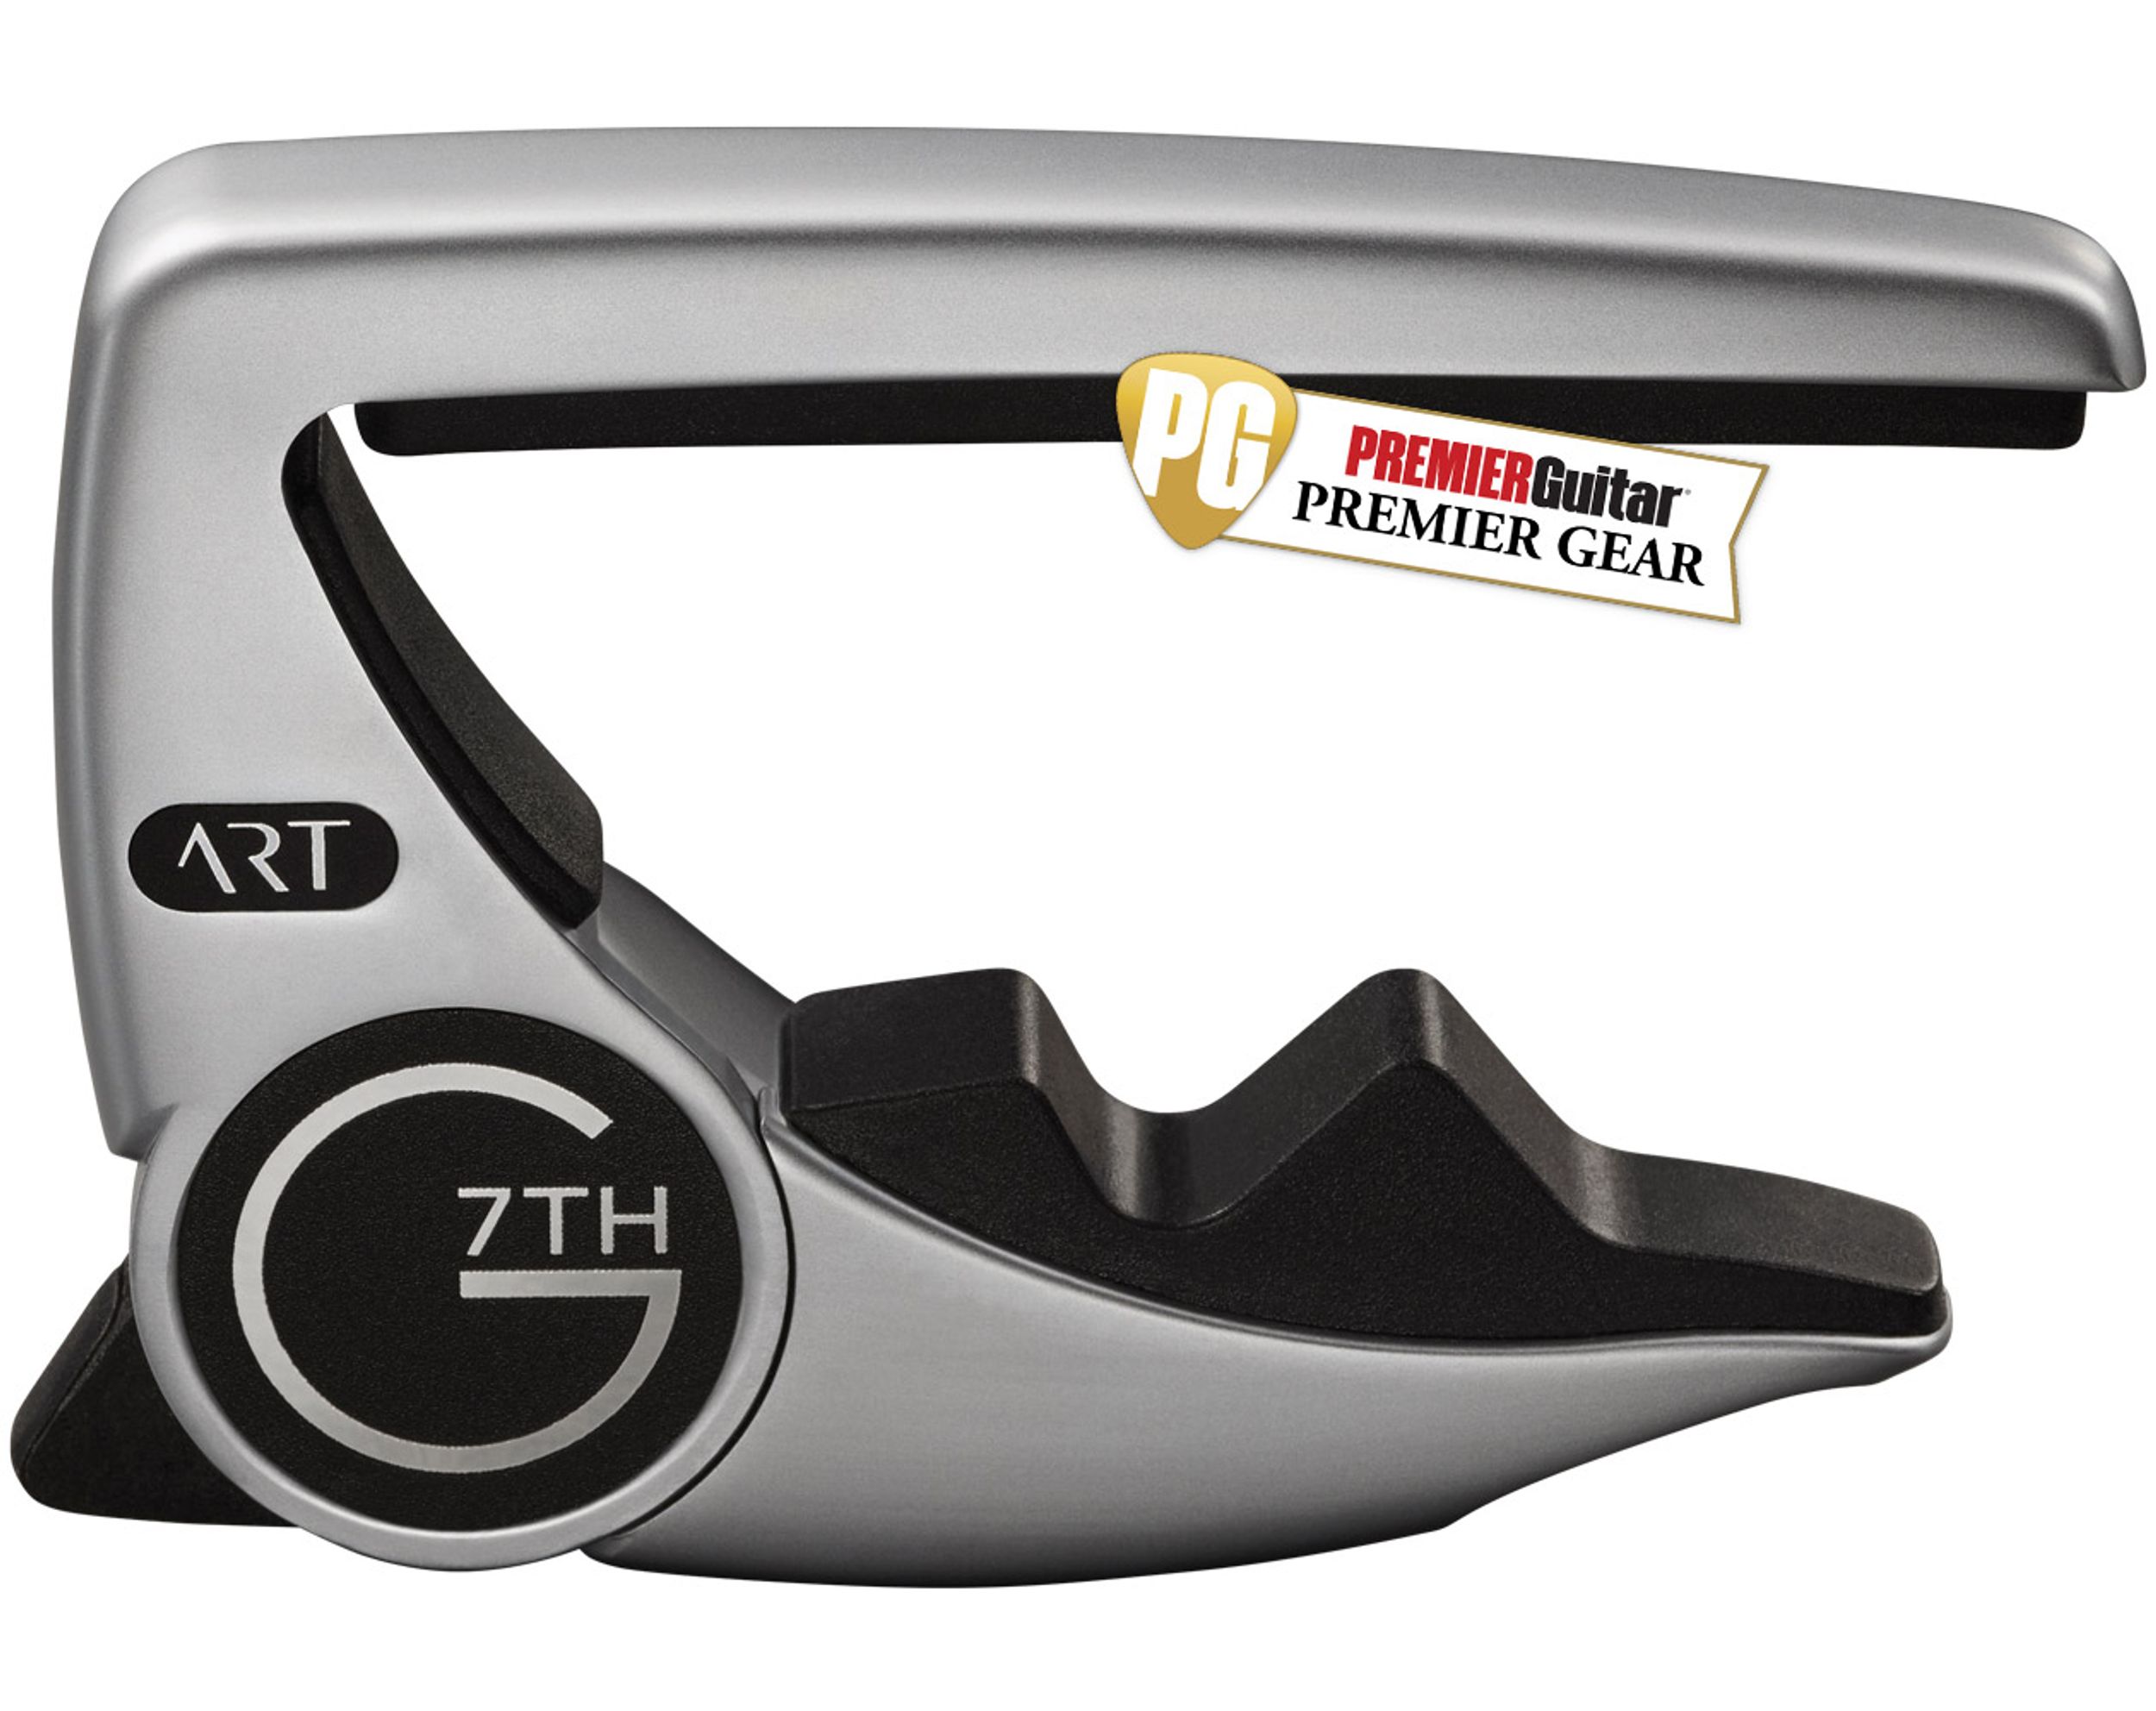 Quick Hit: G7th Performance 3 ART Capo Review